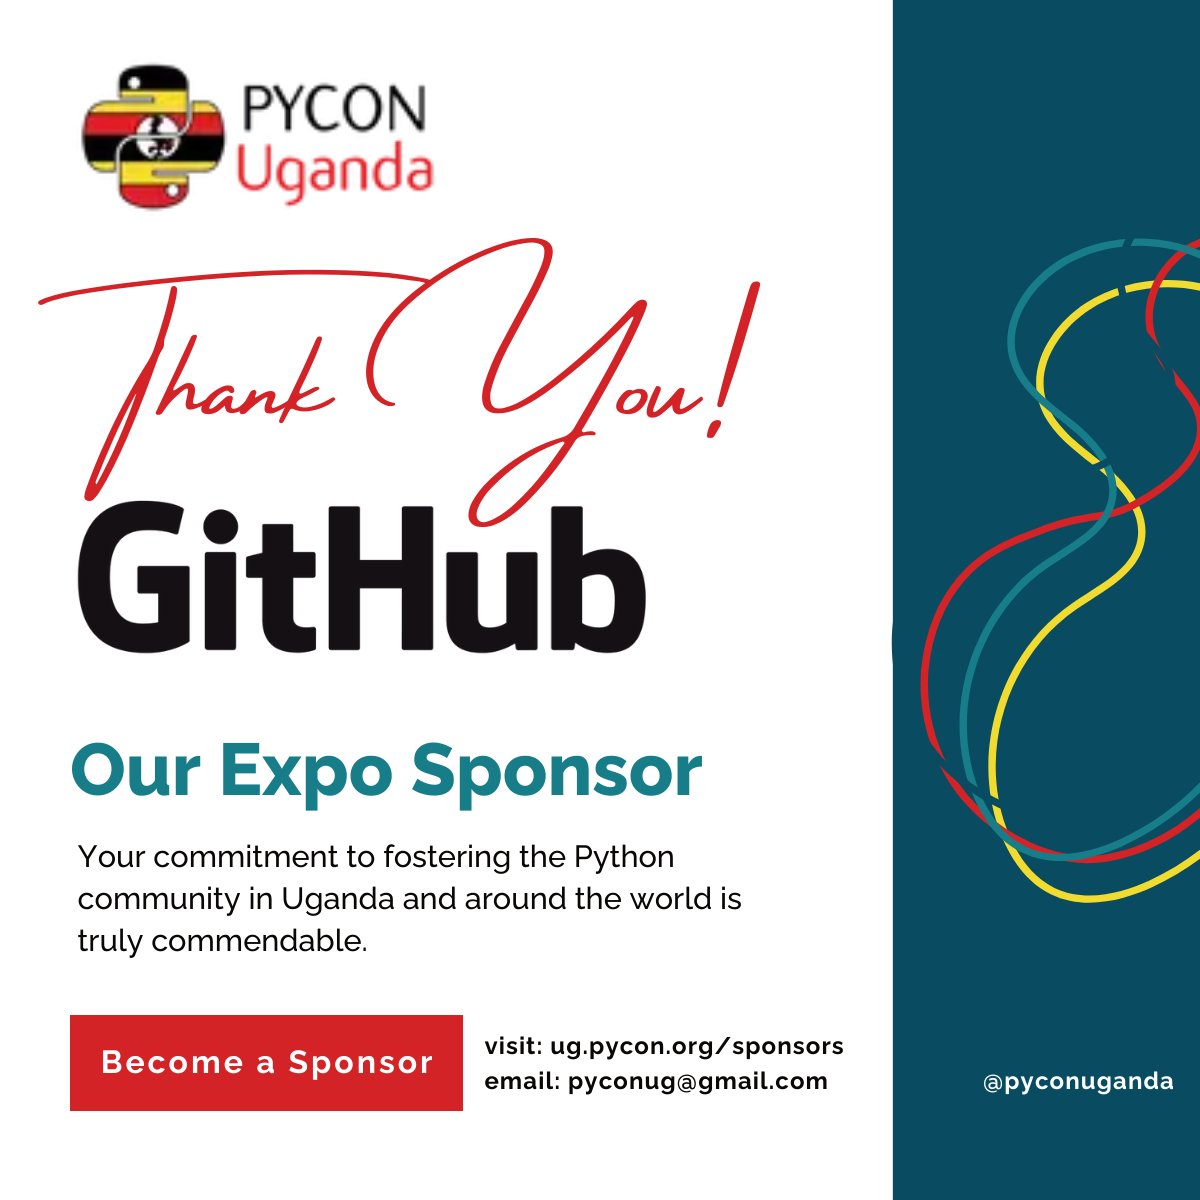 We're excited to announce that @github is a confirmed sponsor for PyCon Uganda 2024! Thank you, GitHub, for supporting our event and the Python community in Uganda. Your contribution helps make PyCon Uganda 2024 a success! #PyConUganda #GitHub #PyConUganda2024 #PyCon